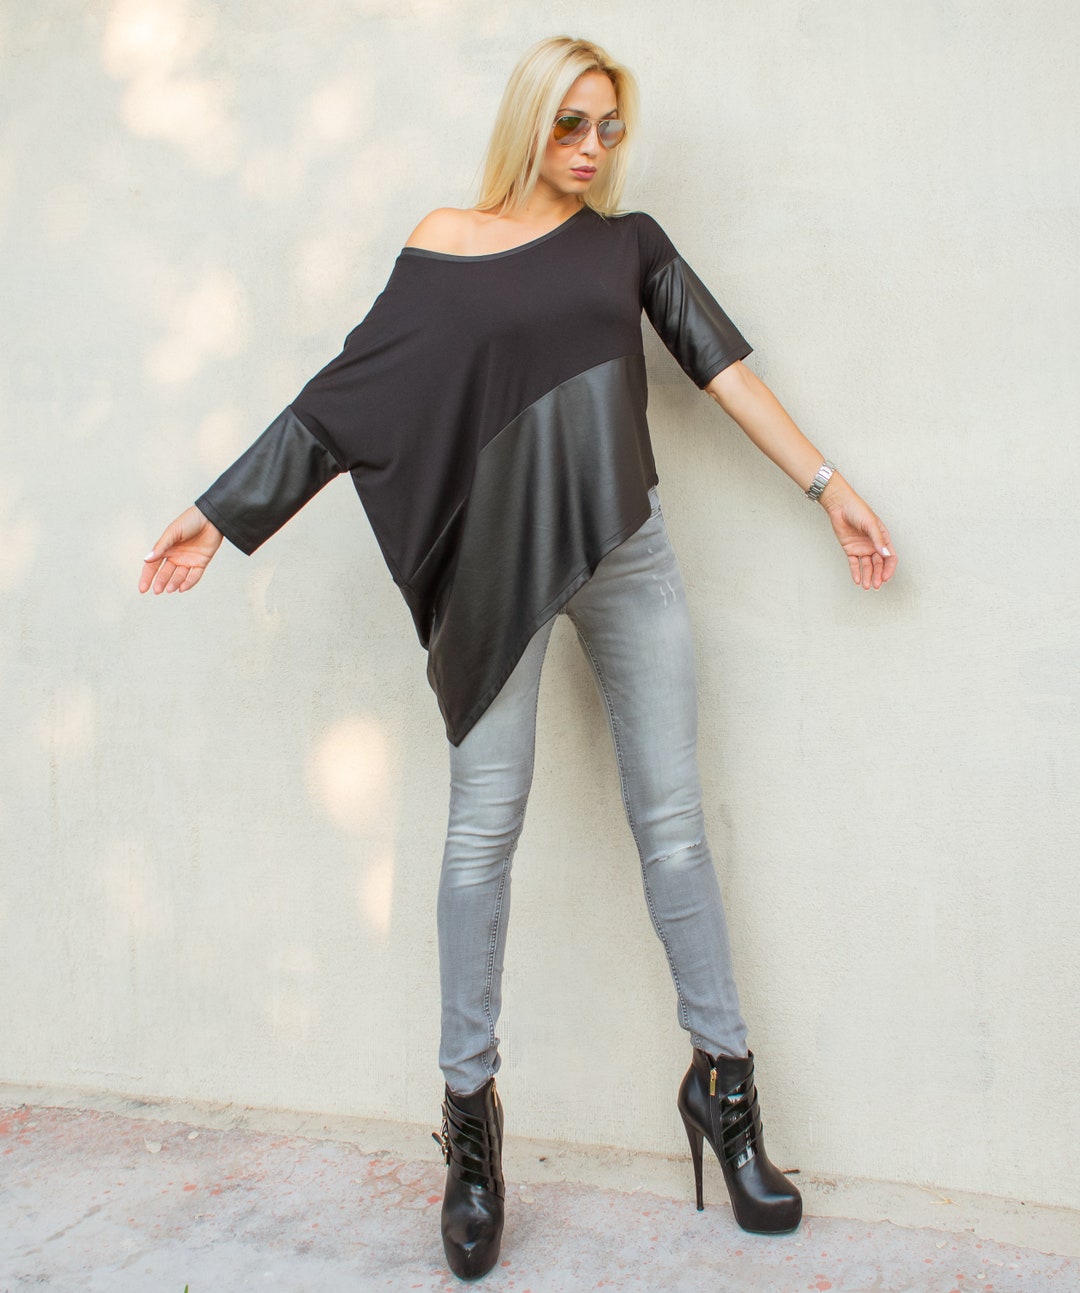 NEW Asymmetric Top Blouse With Black Leather Details / Loose Top ...